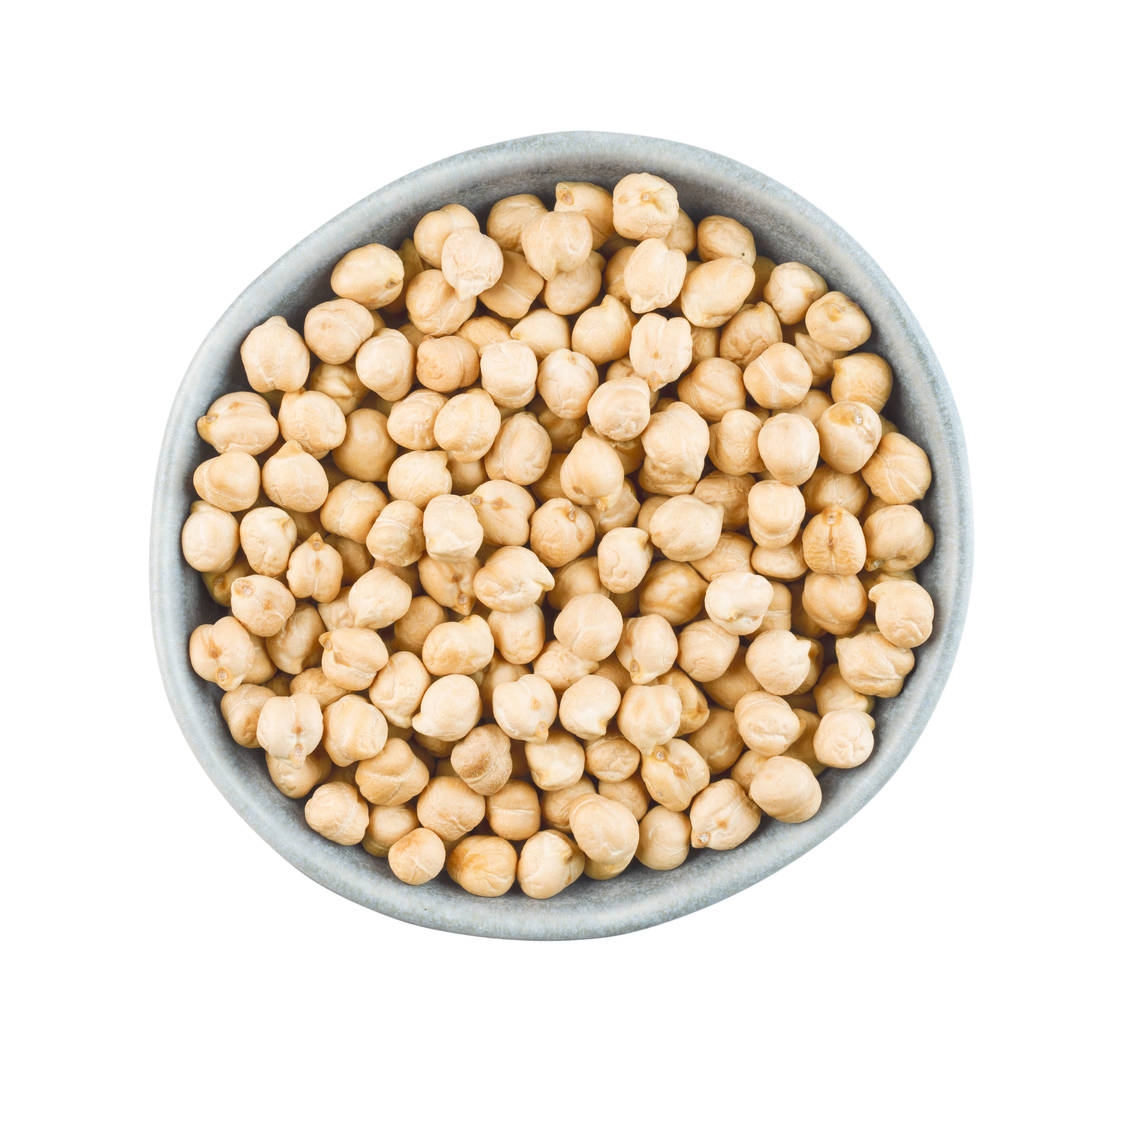 Chickpeas – also known by their popular Spanish name, garbanzo beans – are versatile, storable pulses with high protein, fibre, and iron content.